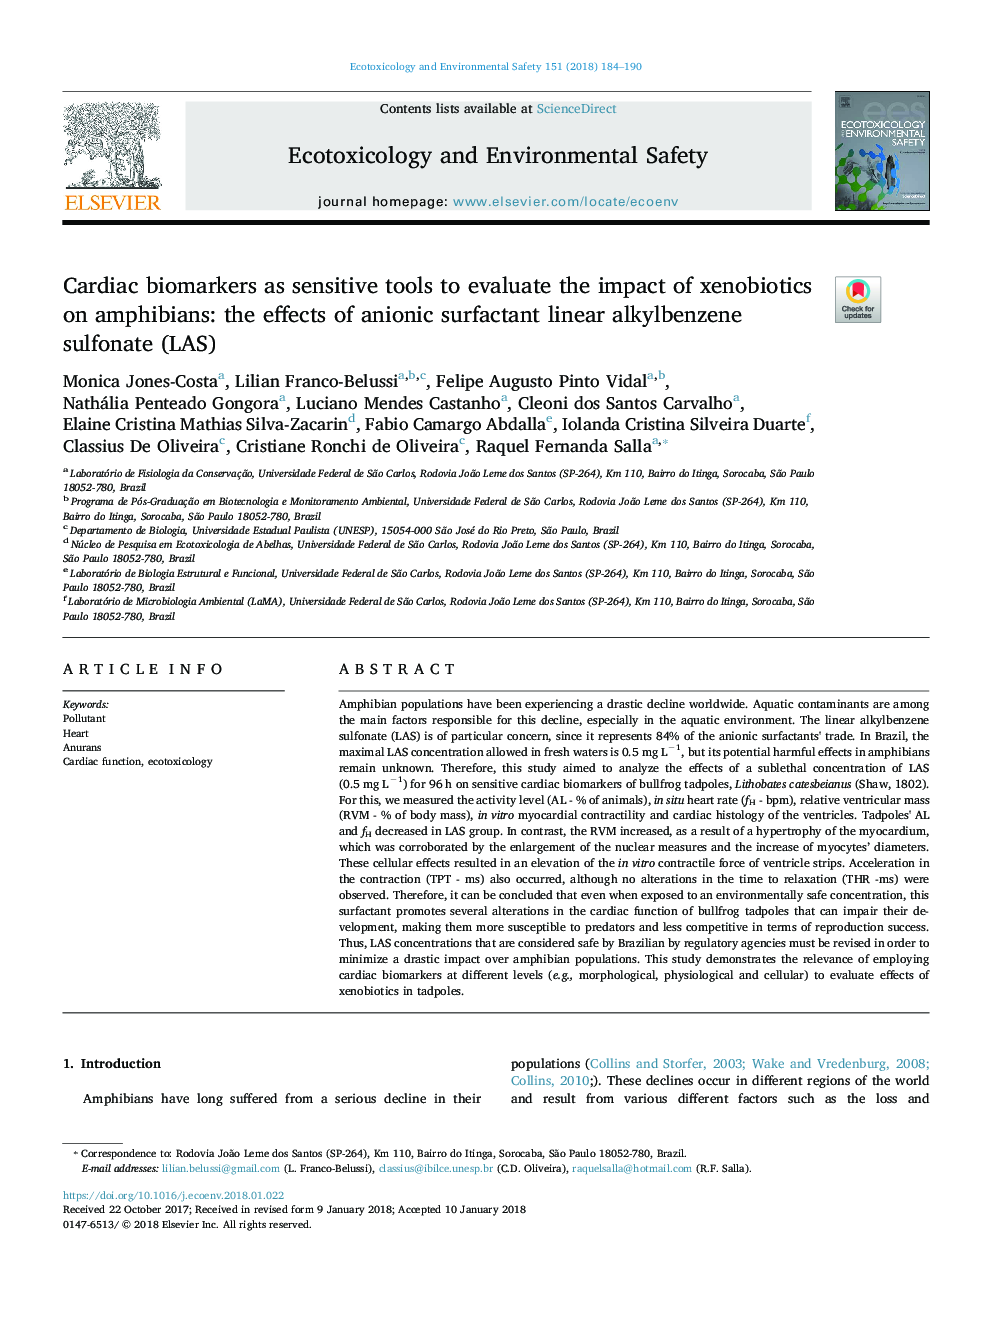 Cardiac biomarkers as sensitive tools to evaluate the impact of xenobiotics on amphibians: the effects of anionic surfactant linear alkylbenzene sulfonate (LAS)